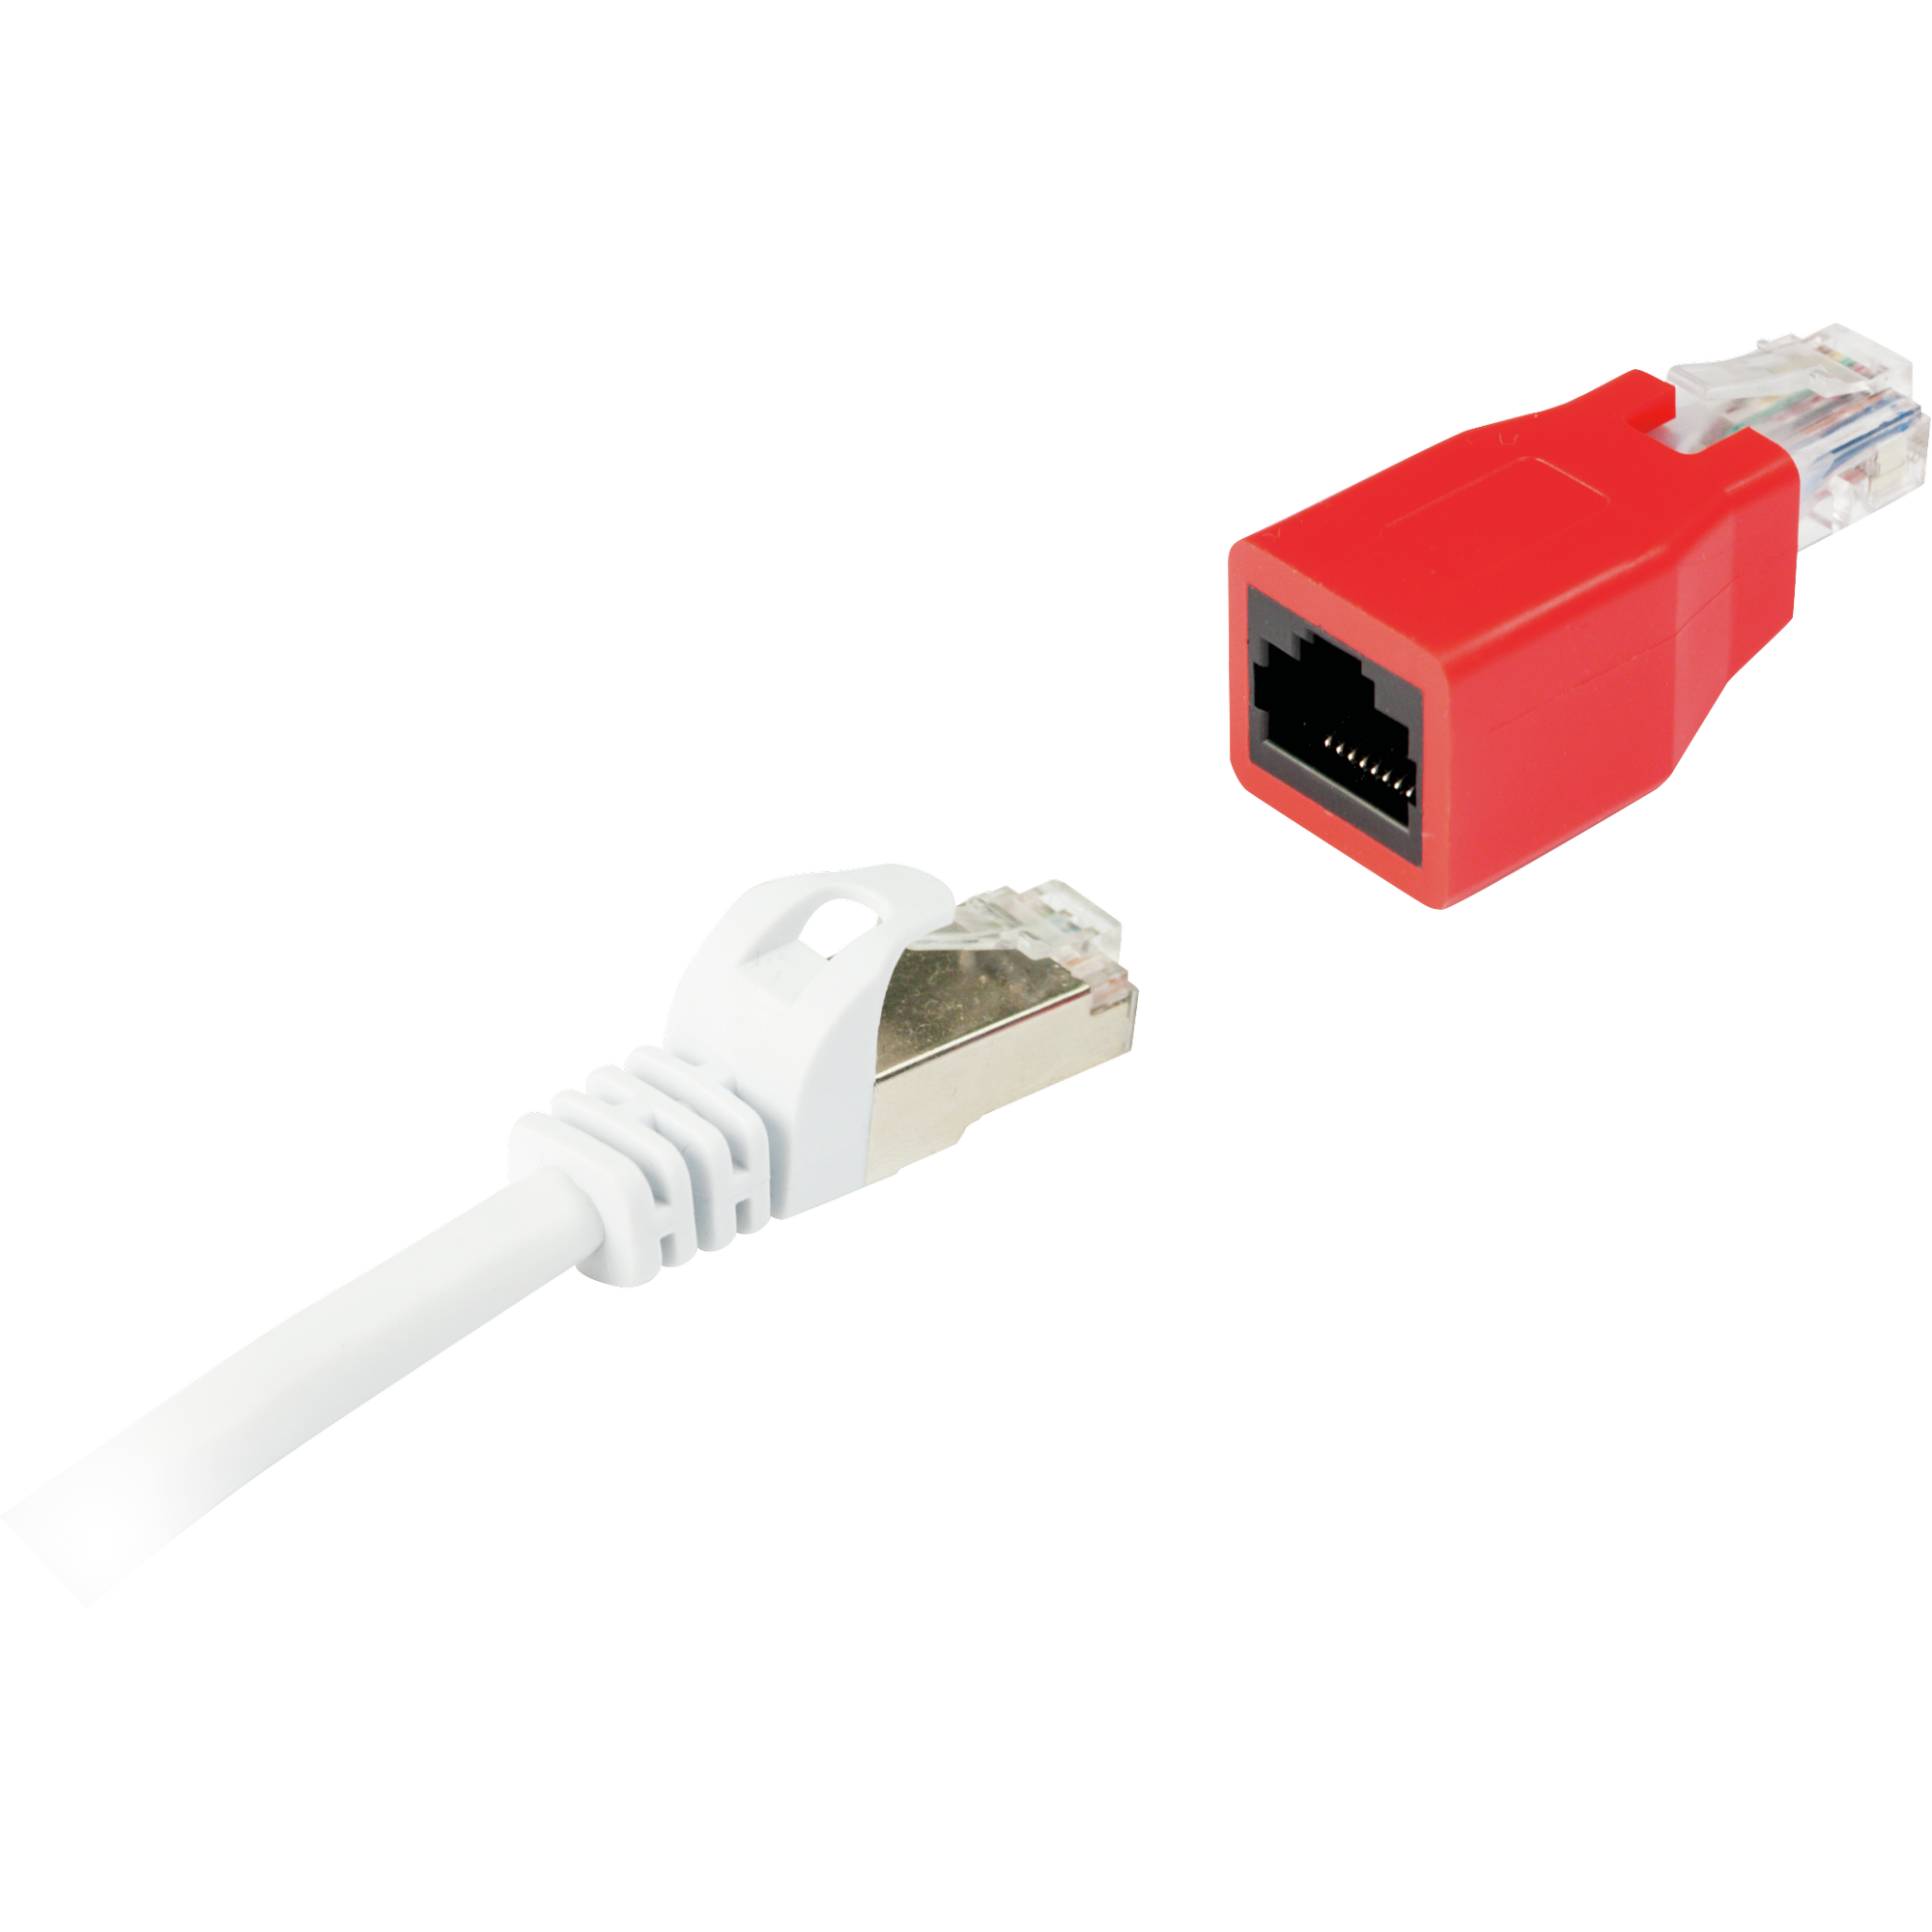 Crossover-Adapter CAT 6 + product picture